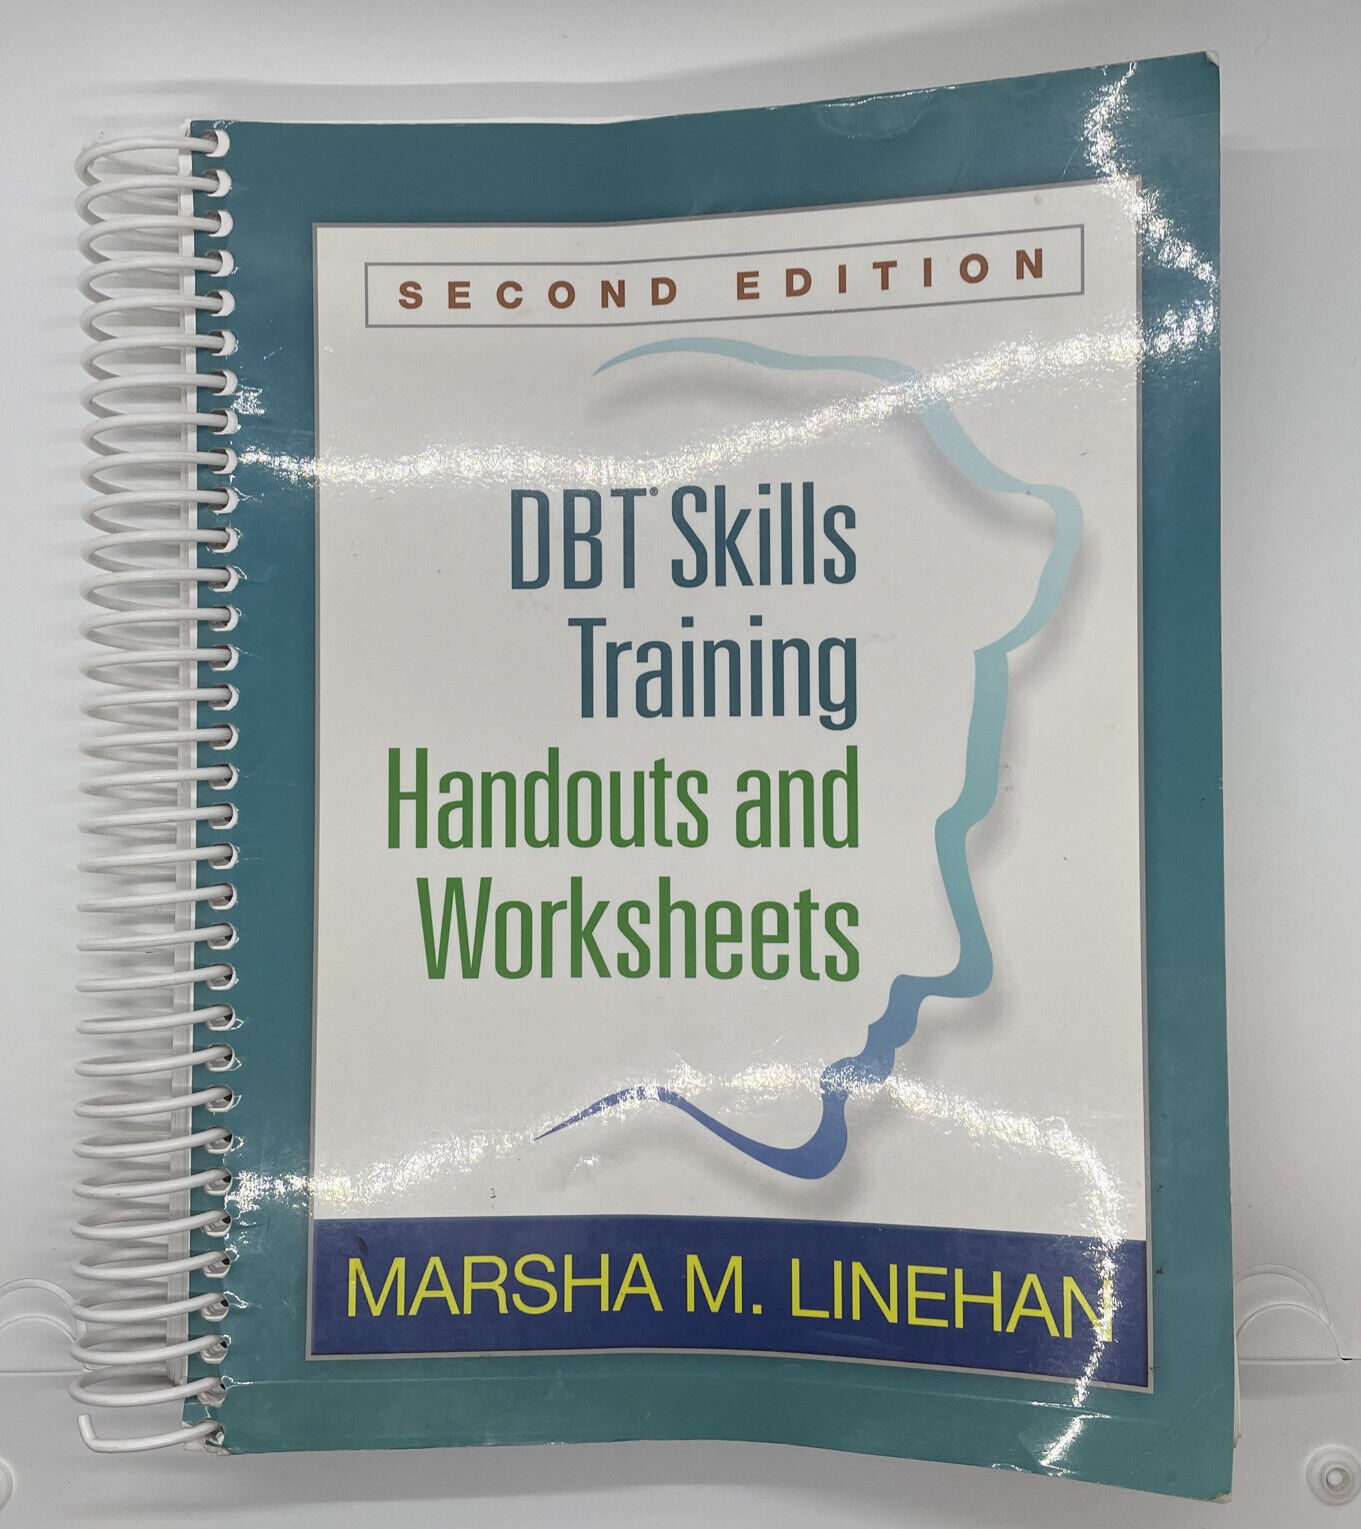 Dbt Skills Training Handouts And Worksheets Second Edition